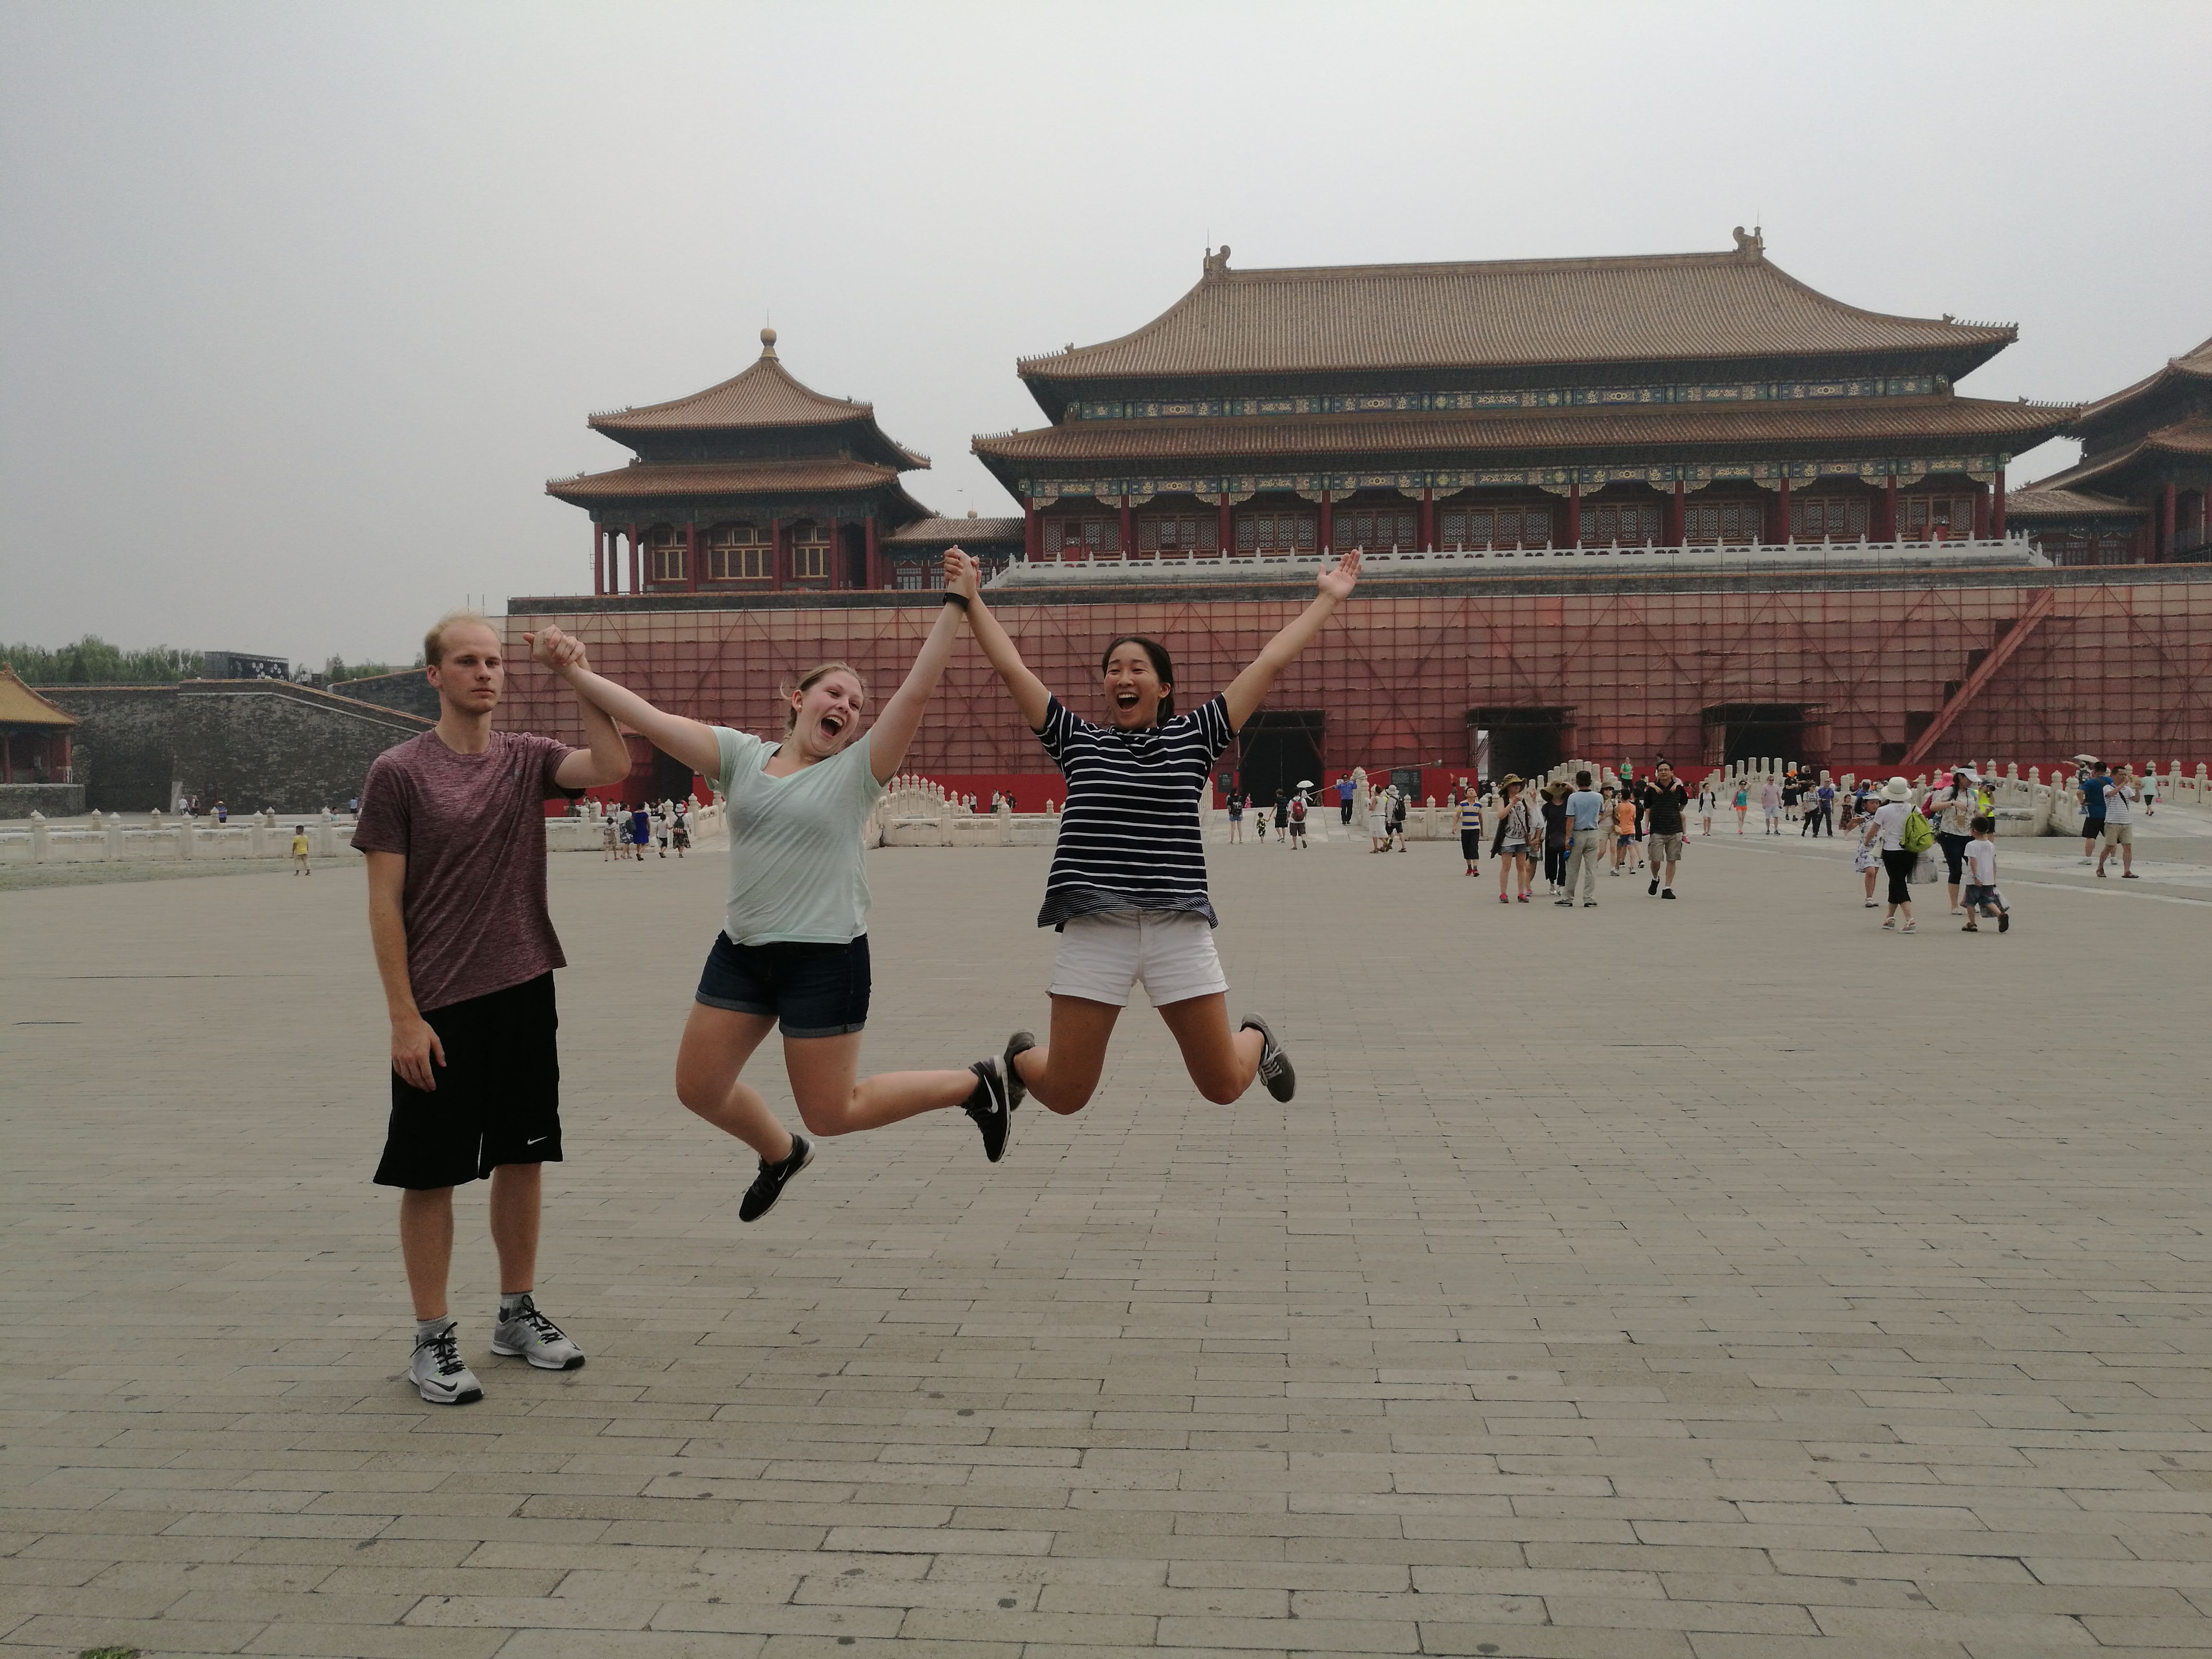 Students in the Forbidden City